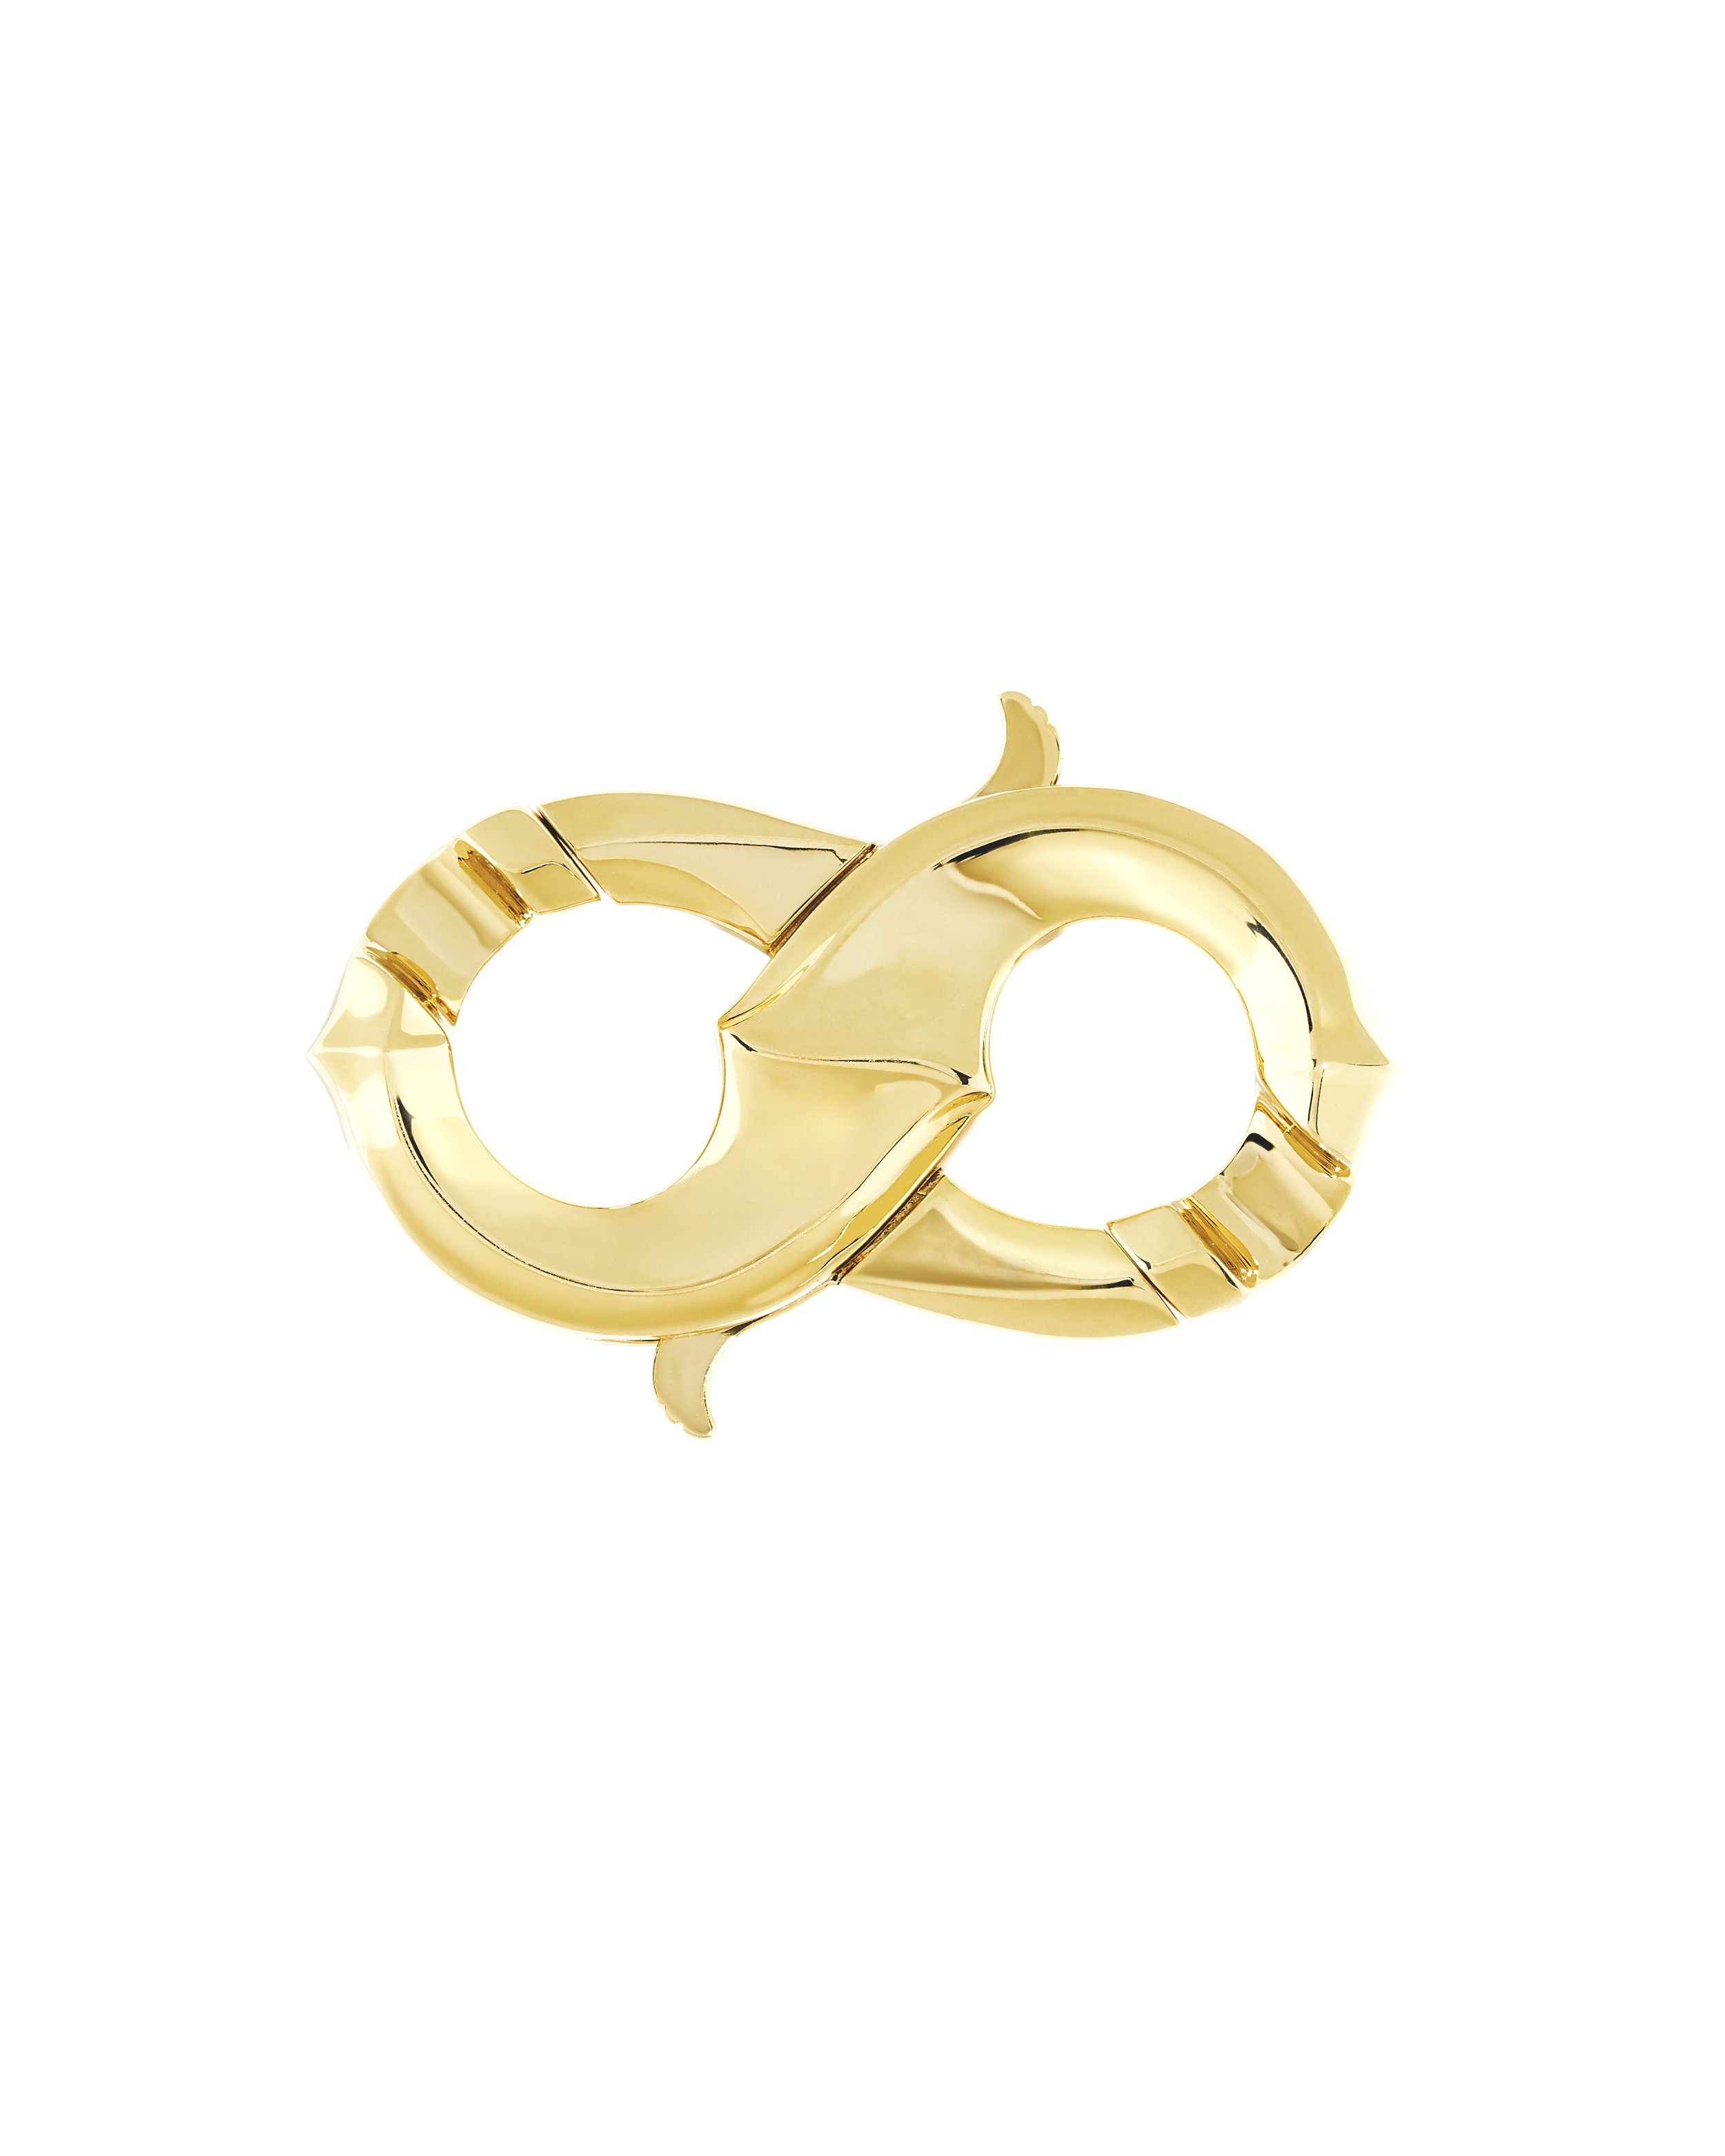 Thorn Addiction Bracelet Clasp in 18kt Yellow Gold - 18mm